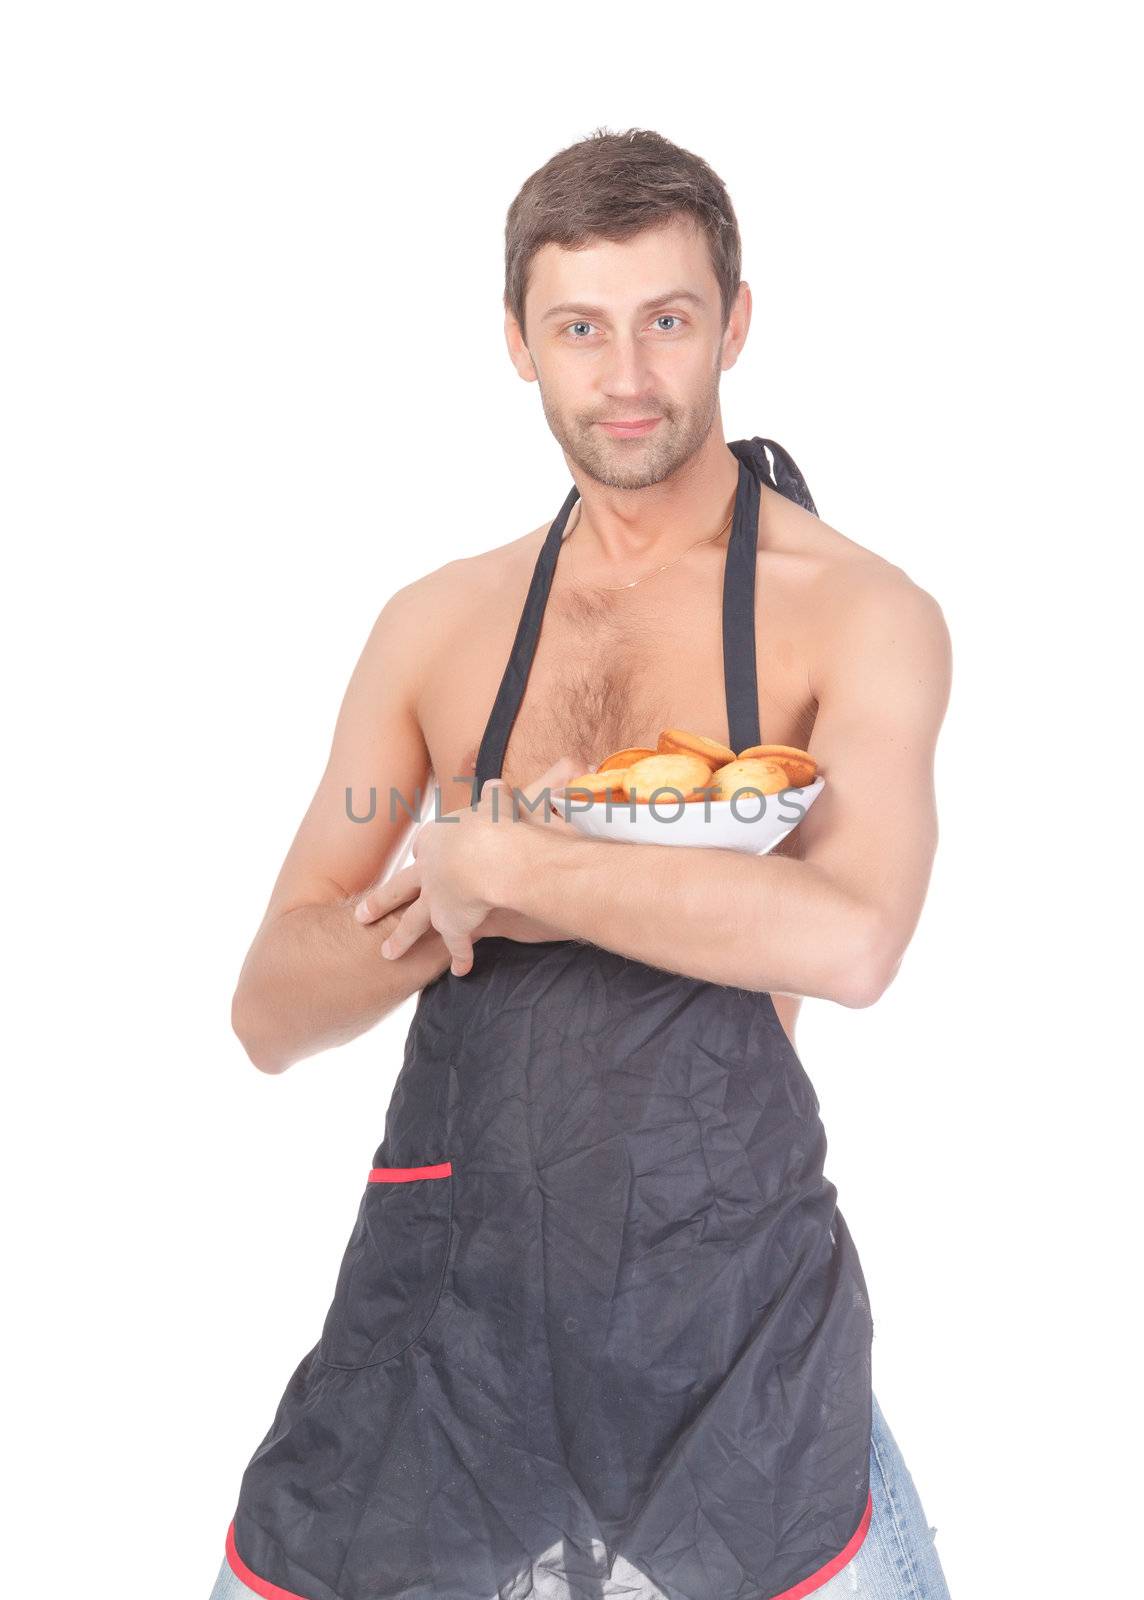 Attractive man trying his hand at baking wearing an apron and carrying a bowl of freshly baked cookies isolated on white